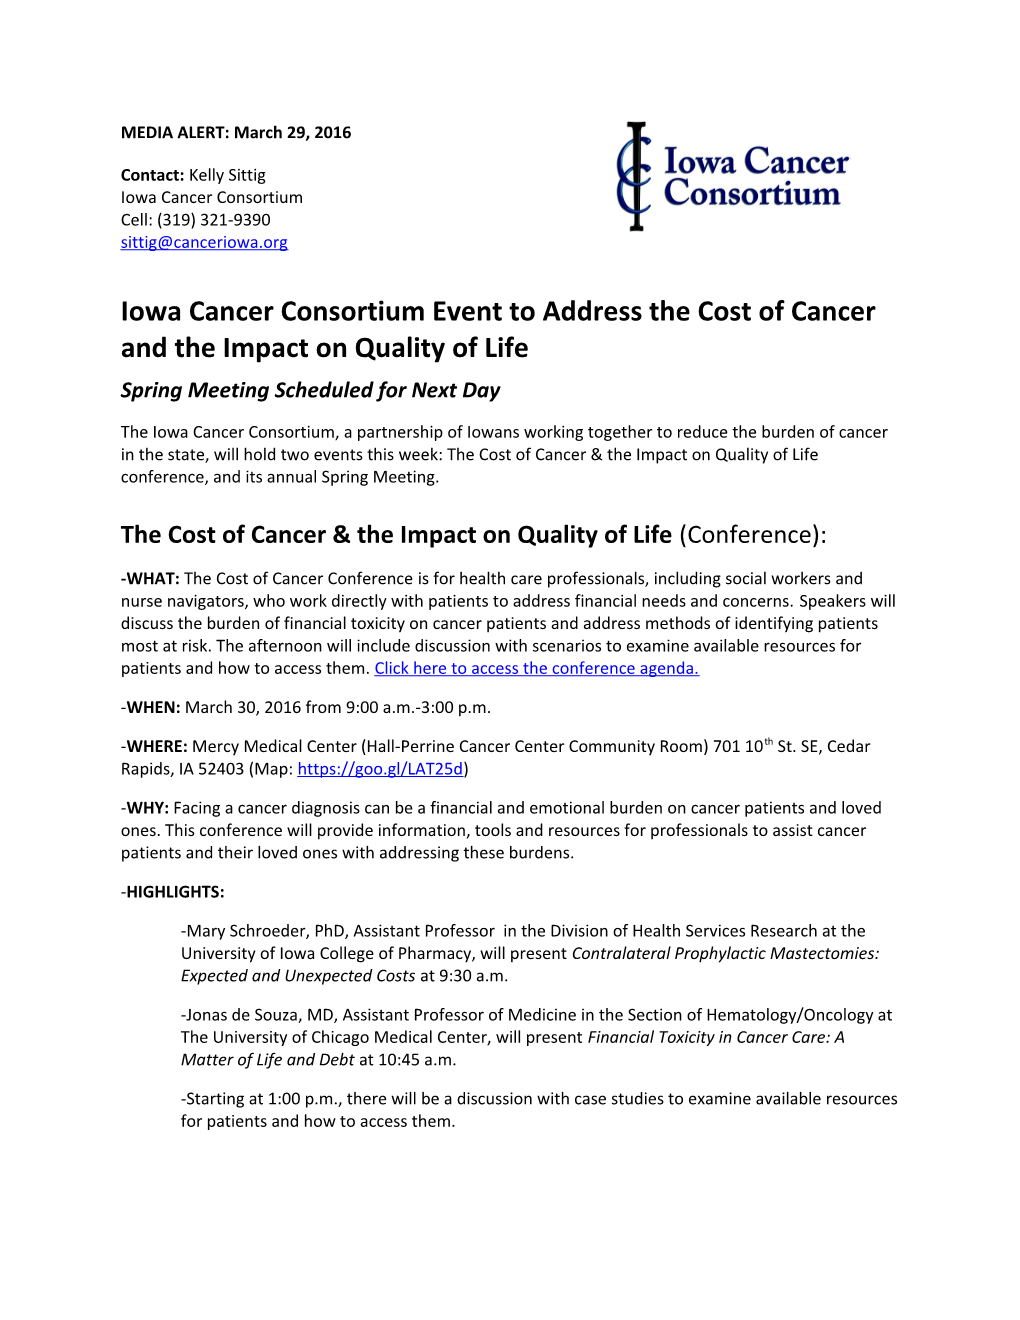 Iowa Cancer Consortium Event to Address the Cost of Cancer and the Impact on Quality of Life